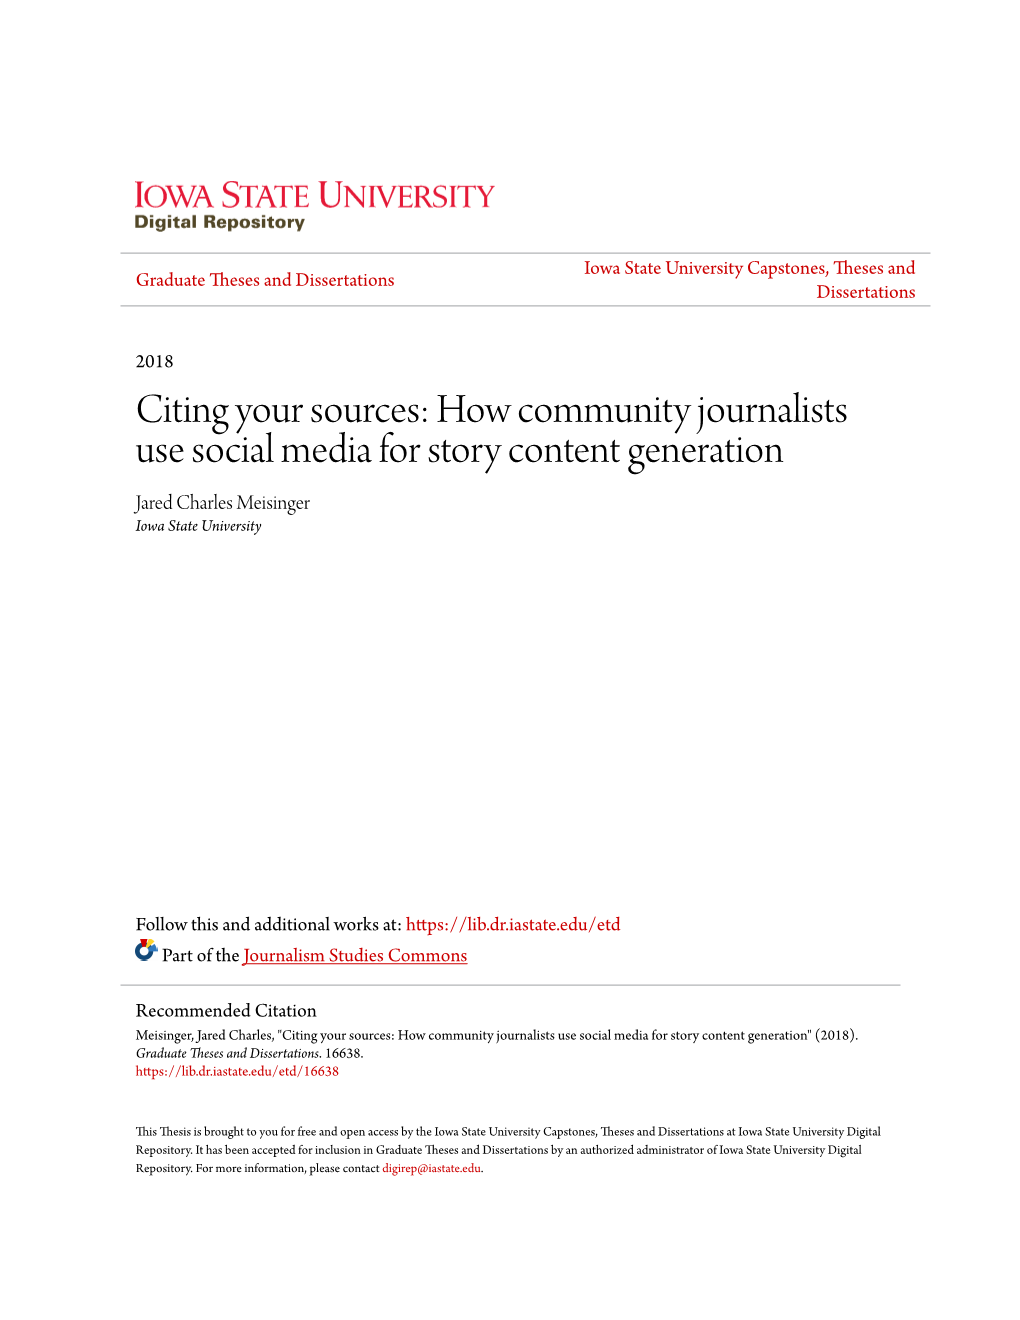 How Community Journalists Use Social Media for Story Content Generation Jared Charles Meisinger Iowa State University